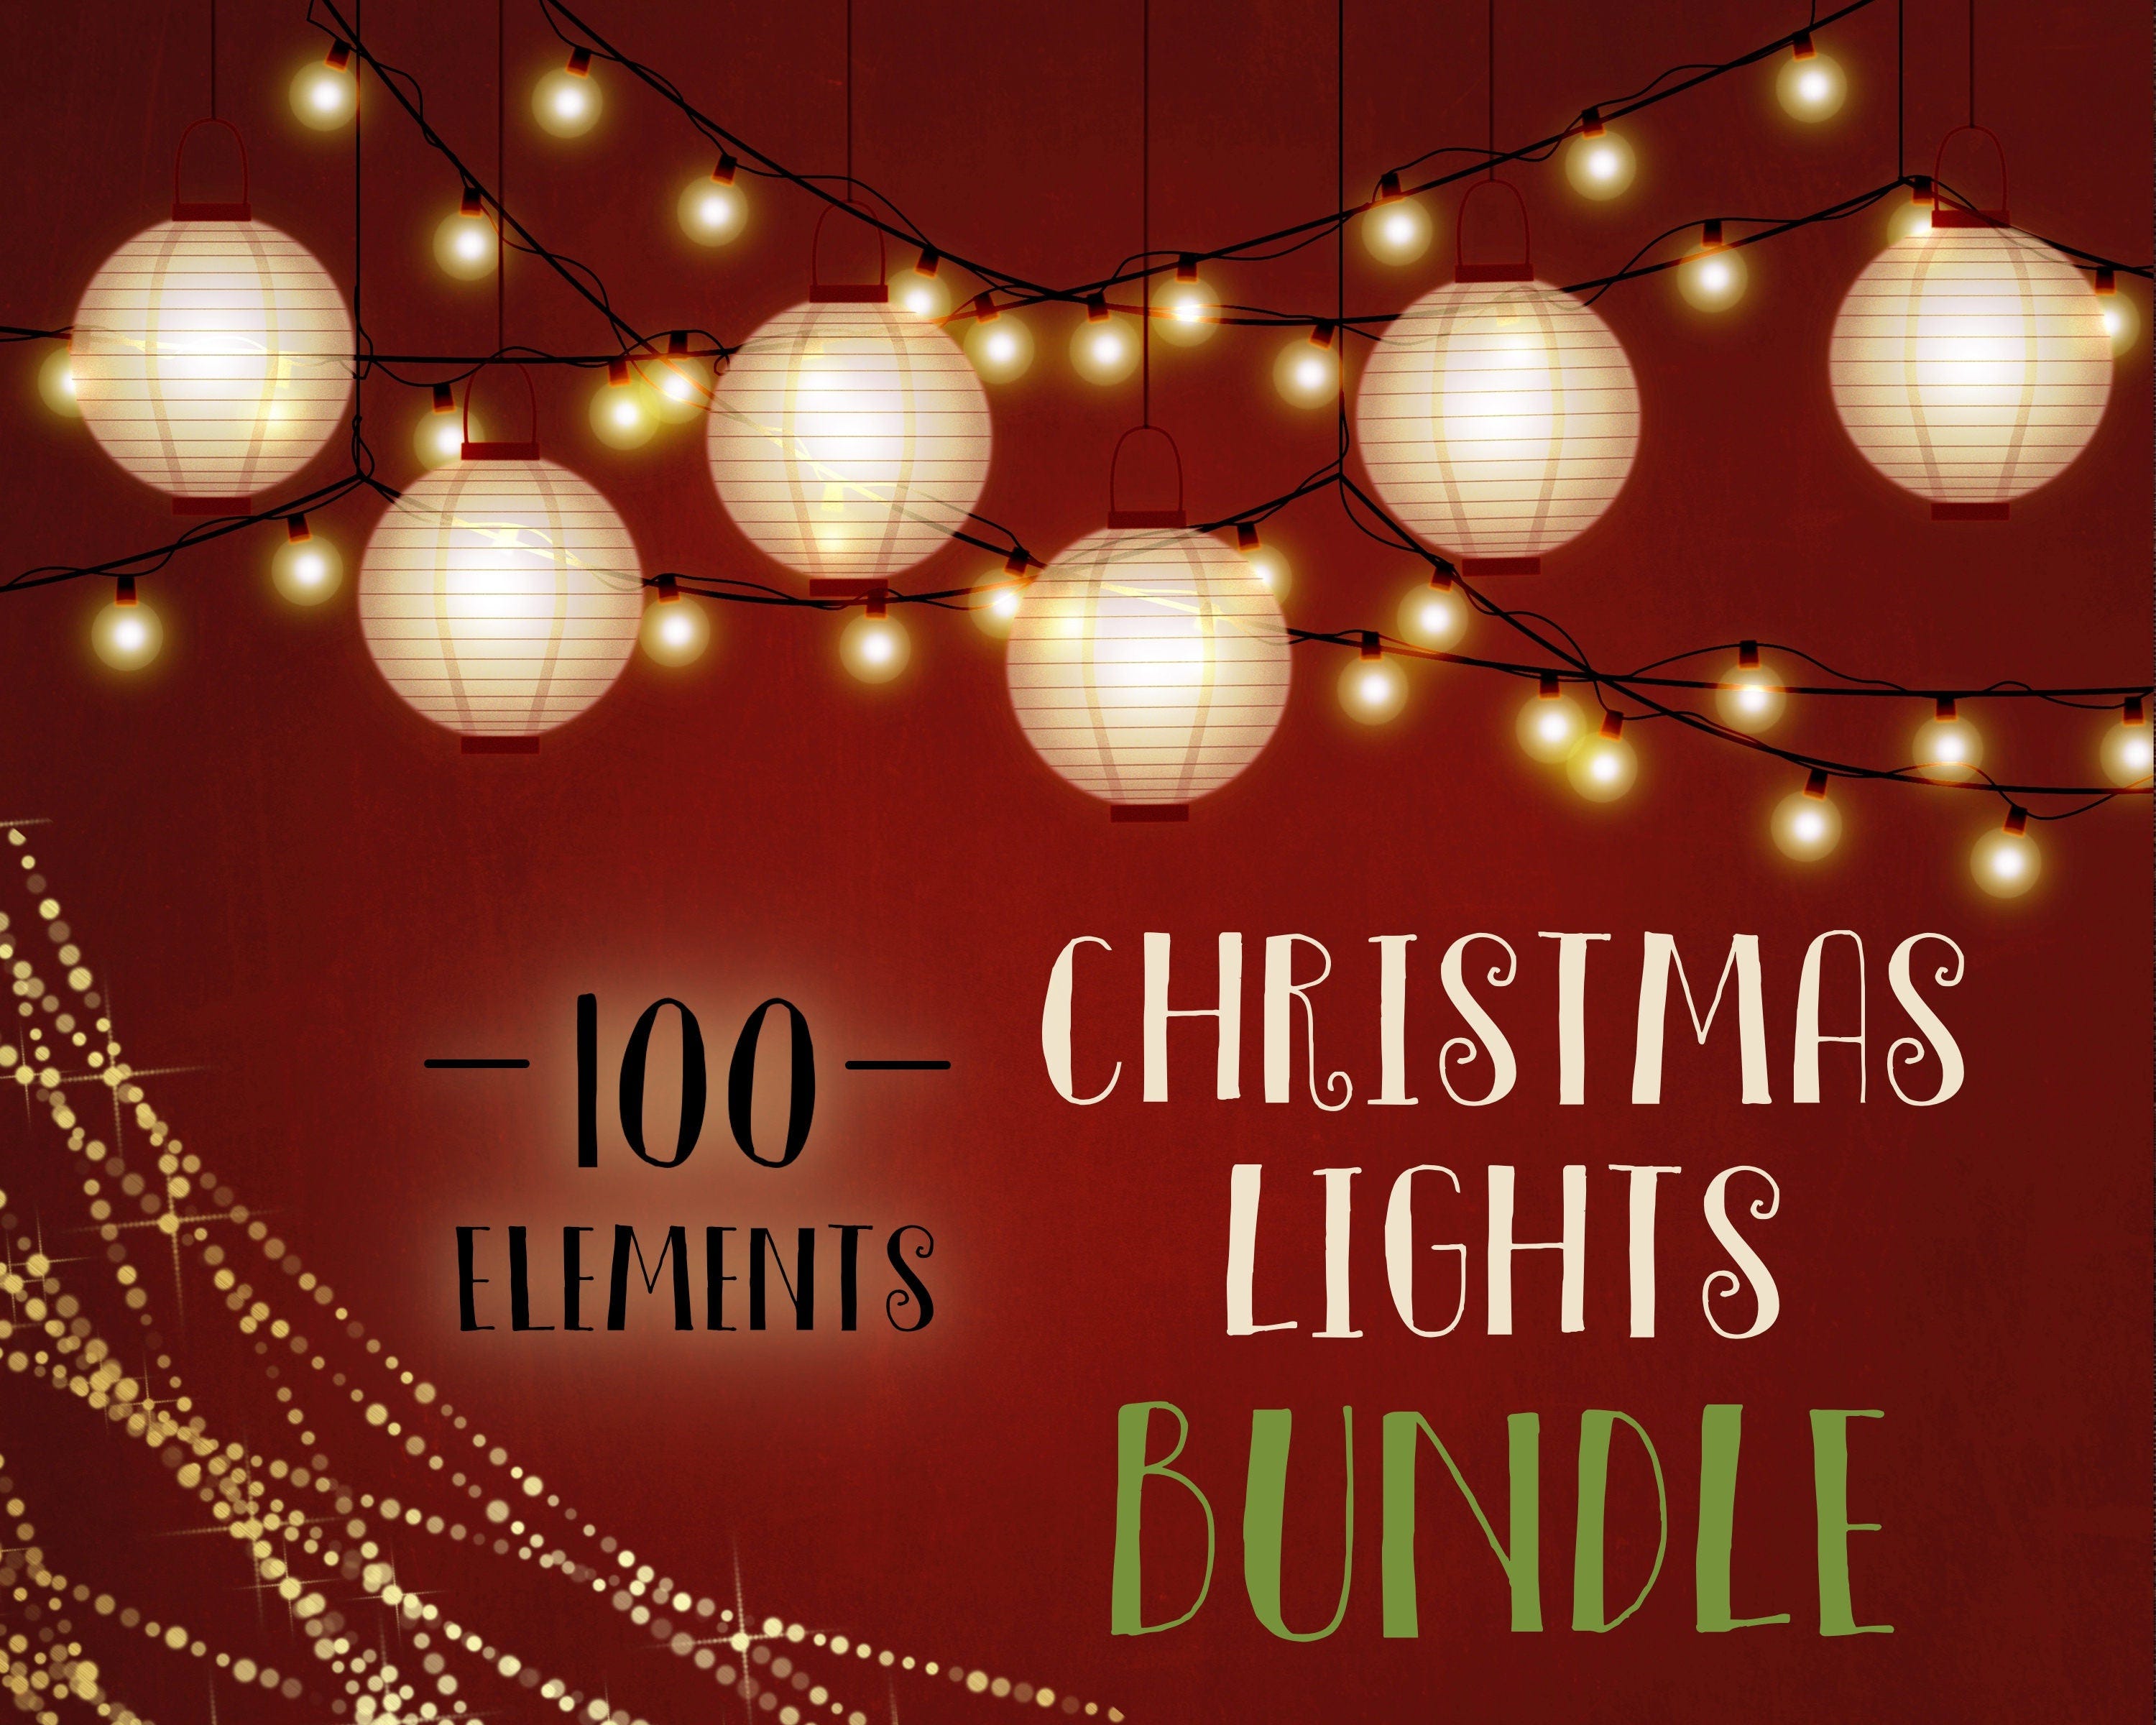 Christmas lights clipart, fairy lights clipart, Christmas overlays, Christmas clipart, xmas, lantern, lights, strings, fairy, pixie,DOWNLOAD